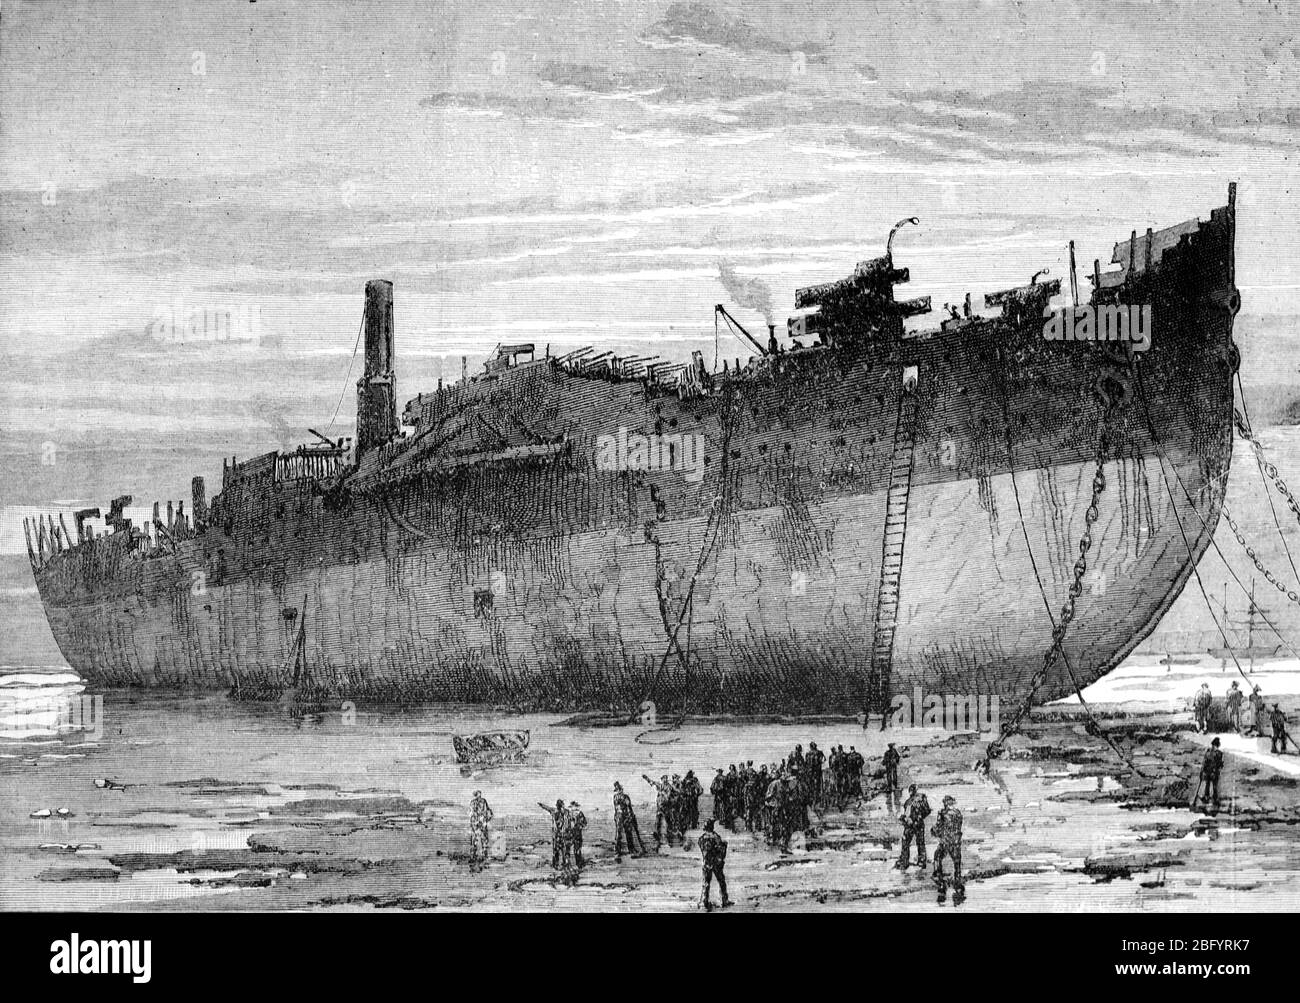 Ship Breaking or Dismantling the SS Great Eastern (1858-1890) the Largest Iron Steamship in the World in its Time; Vintage or Old Illustration or Engraving 1890. Stock Photo